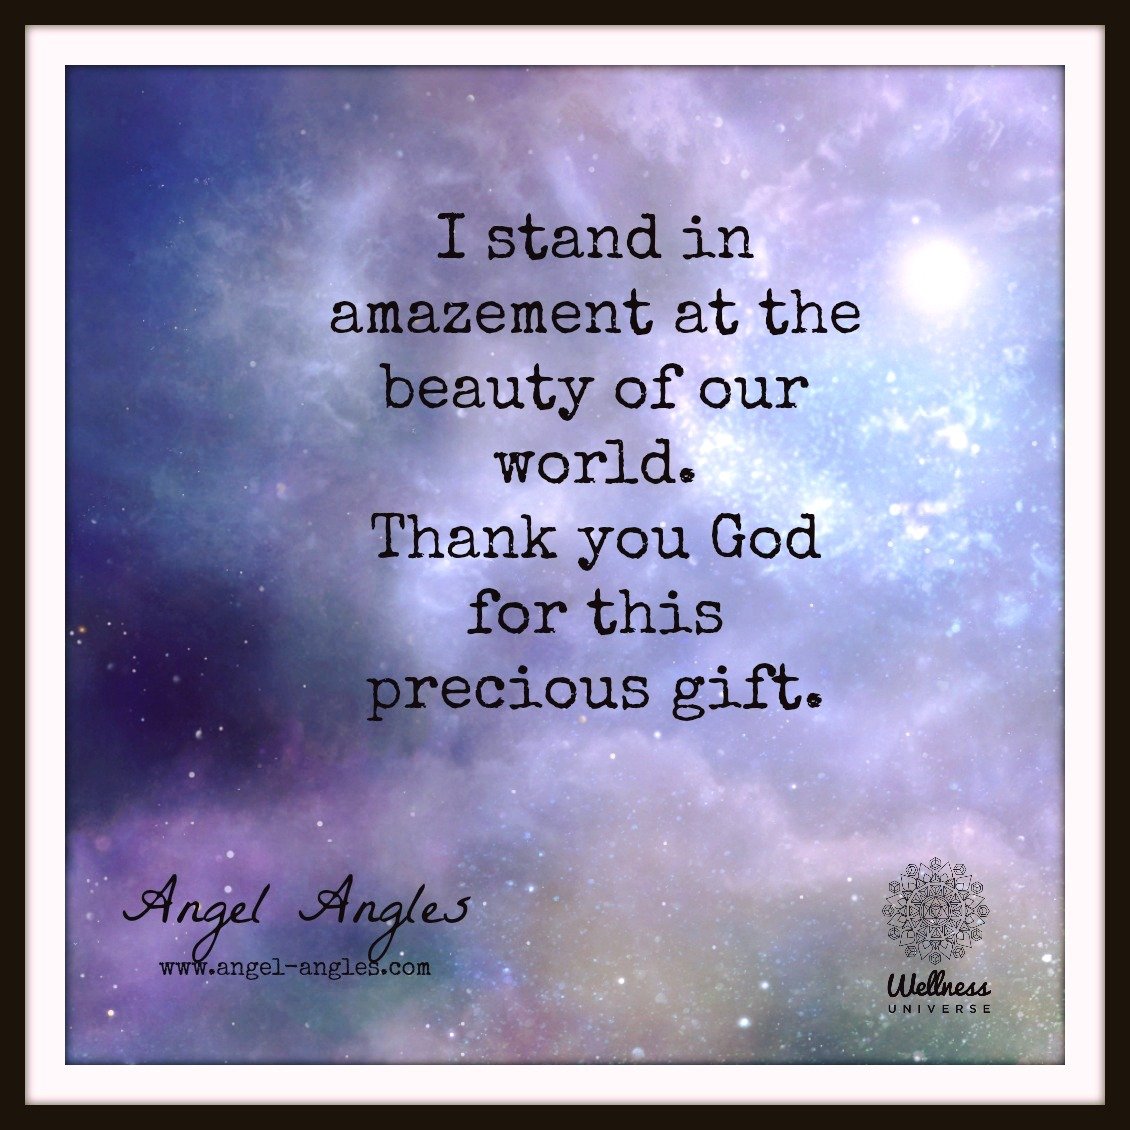 Thank you, God, for the precious gift of this beautiful world. I am amazed, and ever so grateful. 

What beauty are you finding in your world today, dear heart? 

Blessings of love, joy, and peace.
Love,
Janette 
.
.
#WUVIP #WUWorldChanger #Beautiful